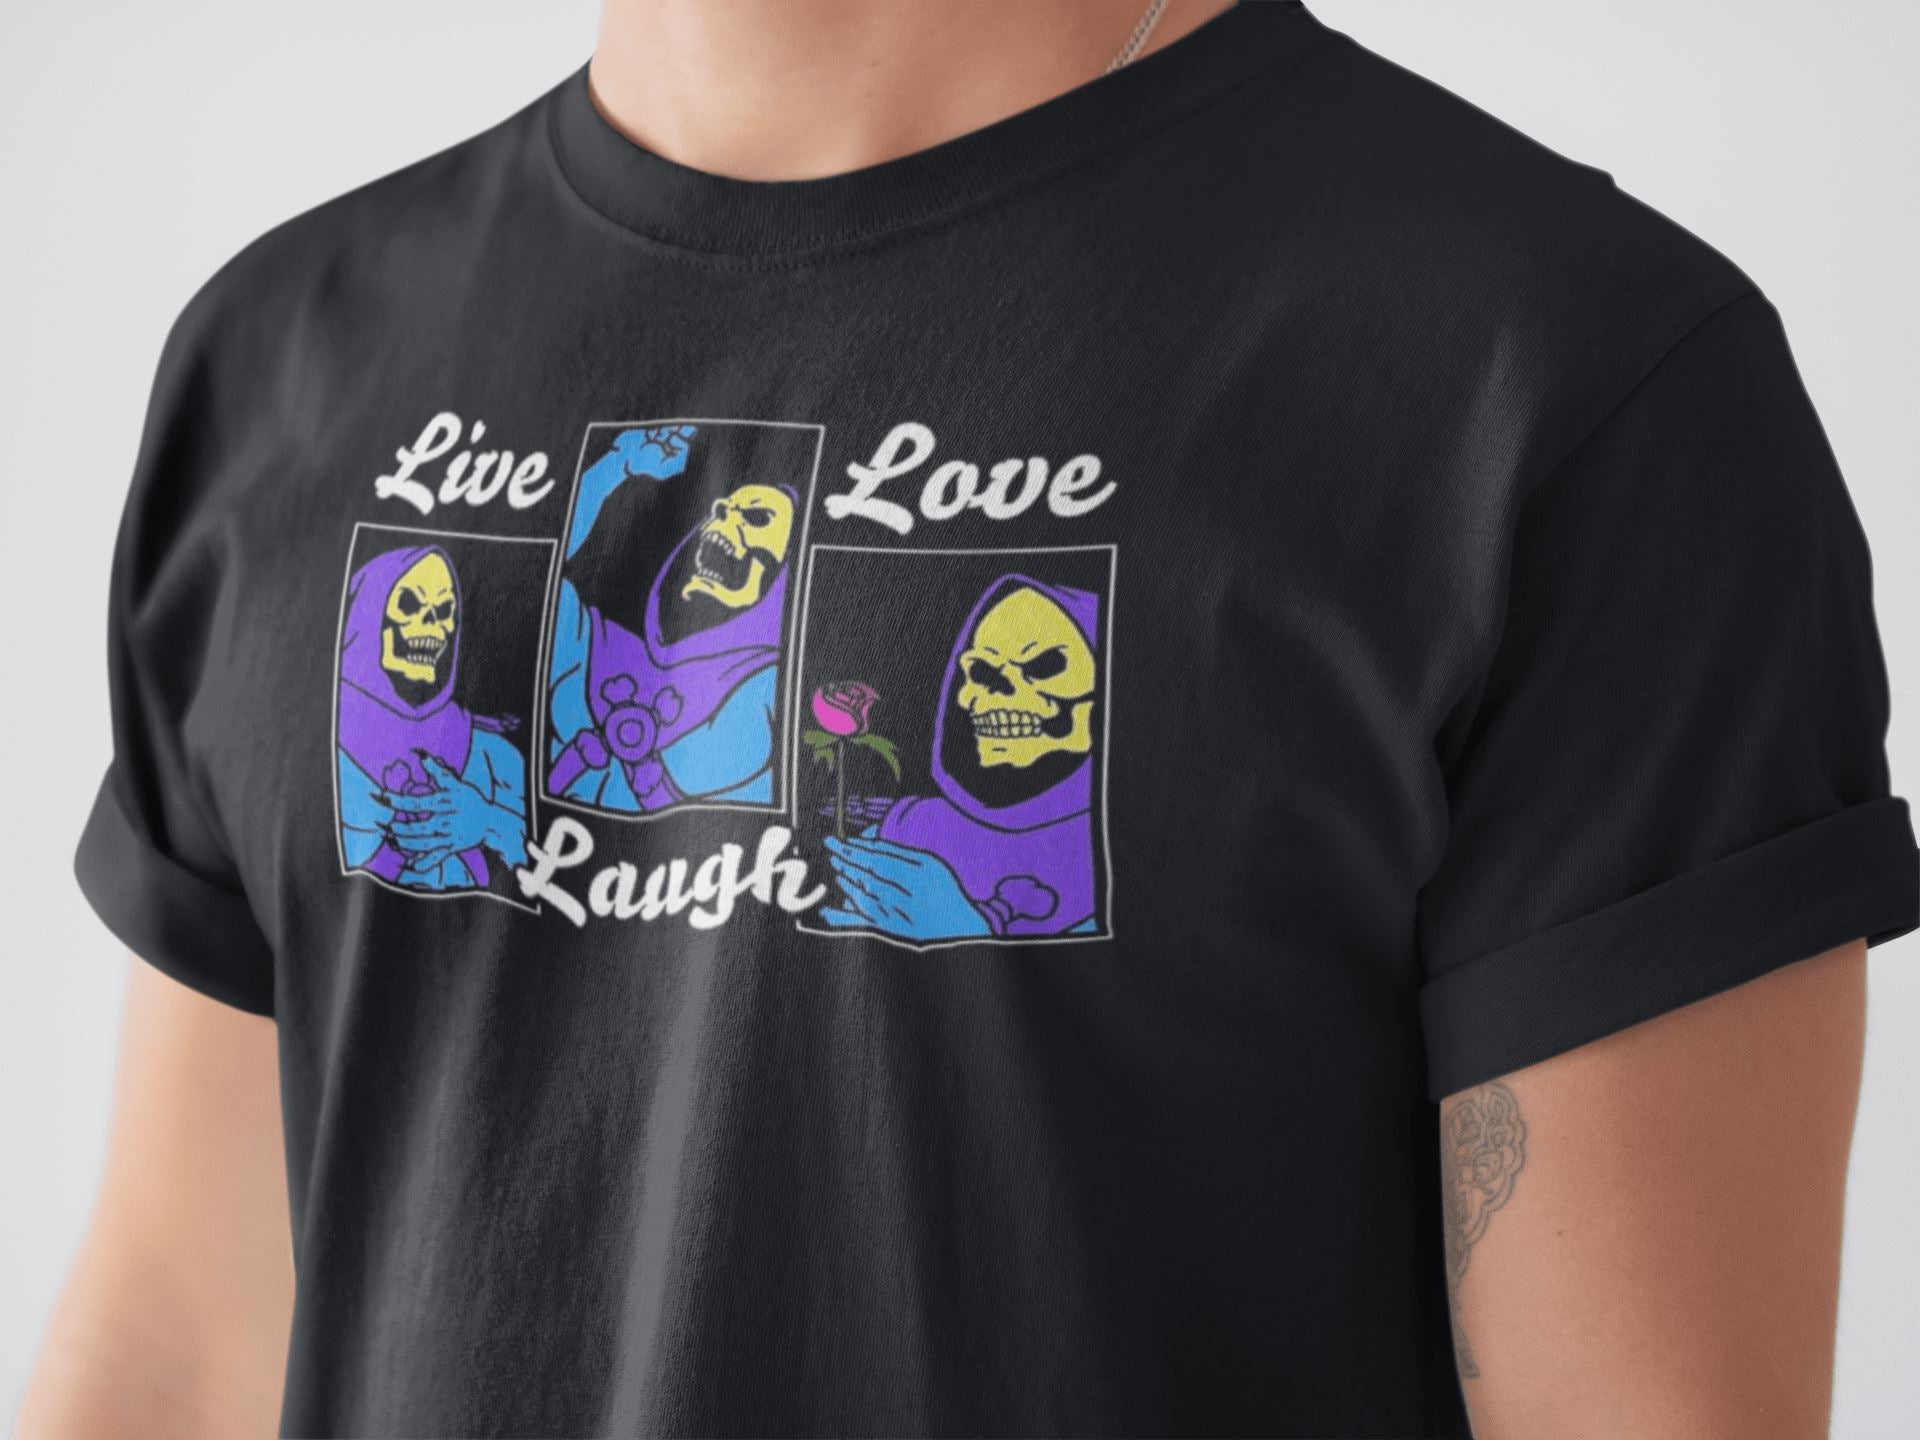 Live Laugh Love Official Funny Black T Shirt for Men and Women - Catch My Drift India  black, clothing, funny, general, made in india, shirt, t shirt, trending, tshirt